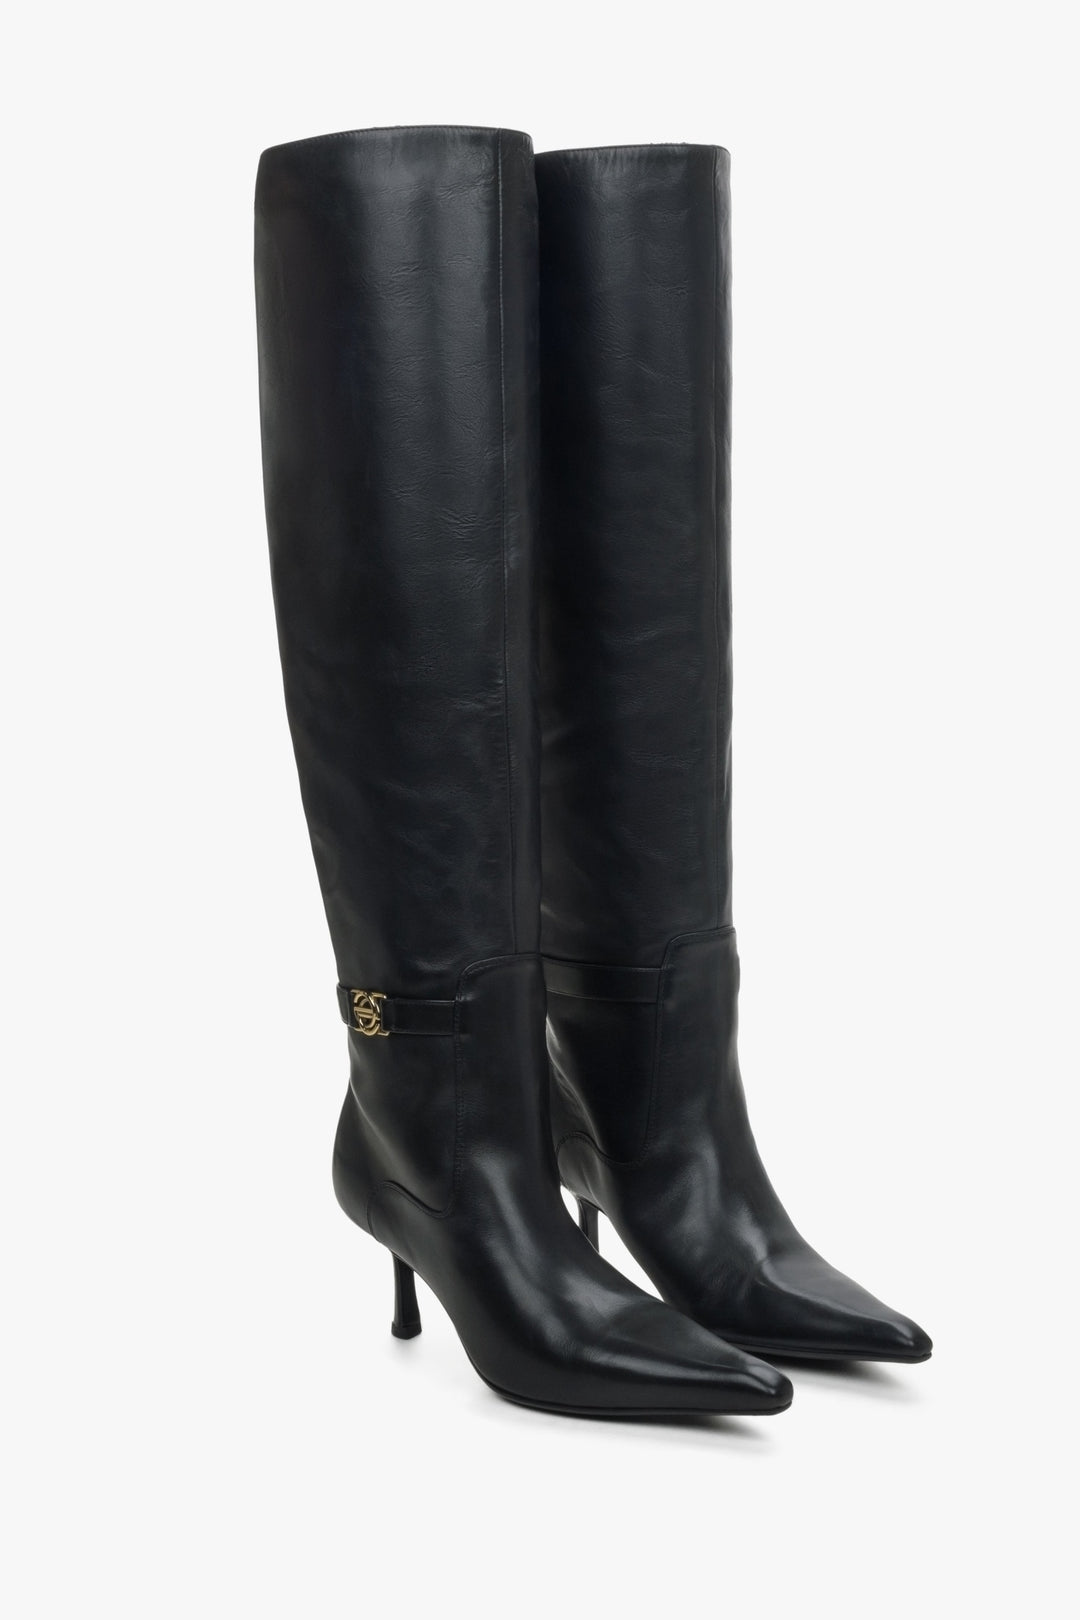 Women's high boots in black made of genuine leather with a low heel by Estro - close-up on the toe and front of the shoe.